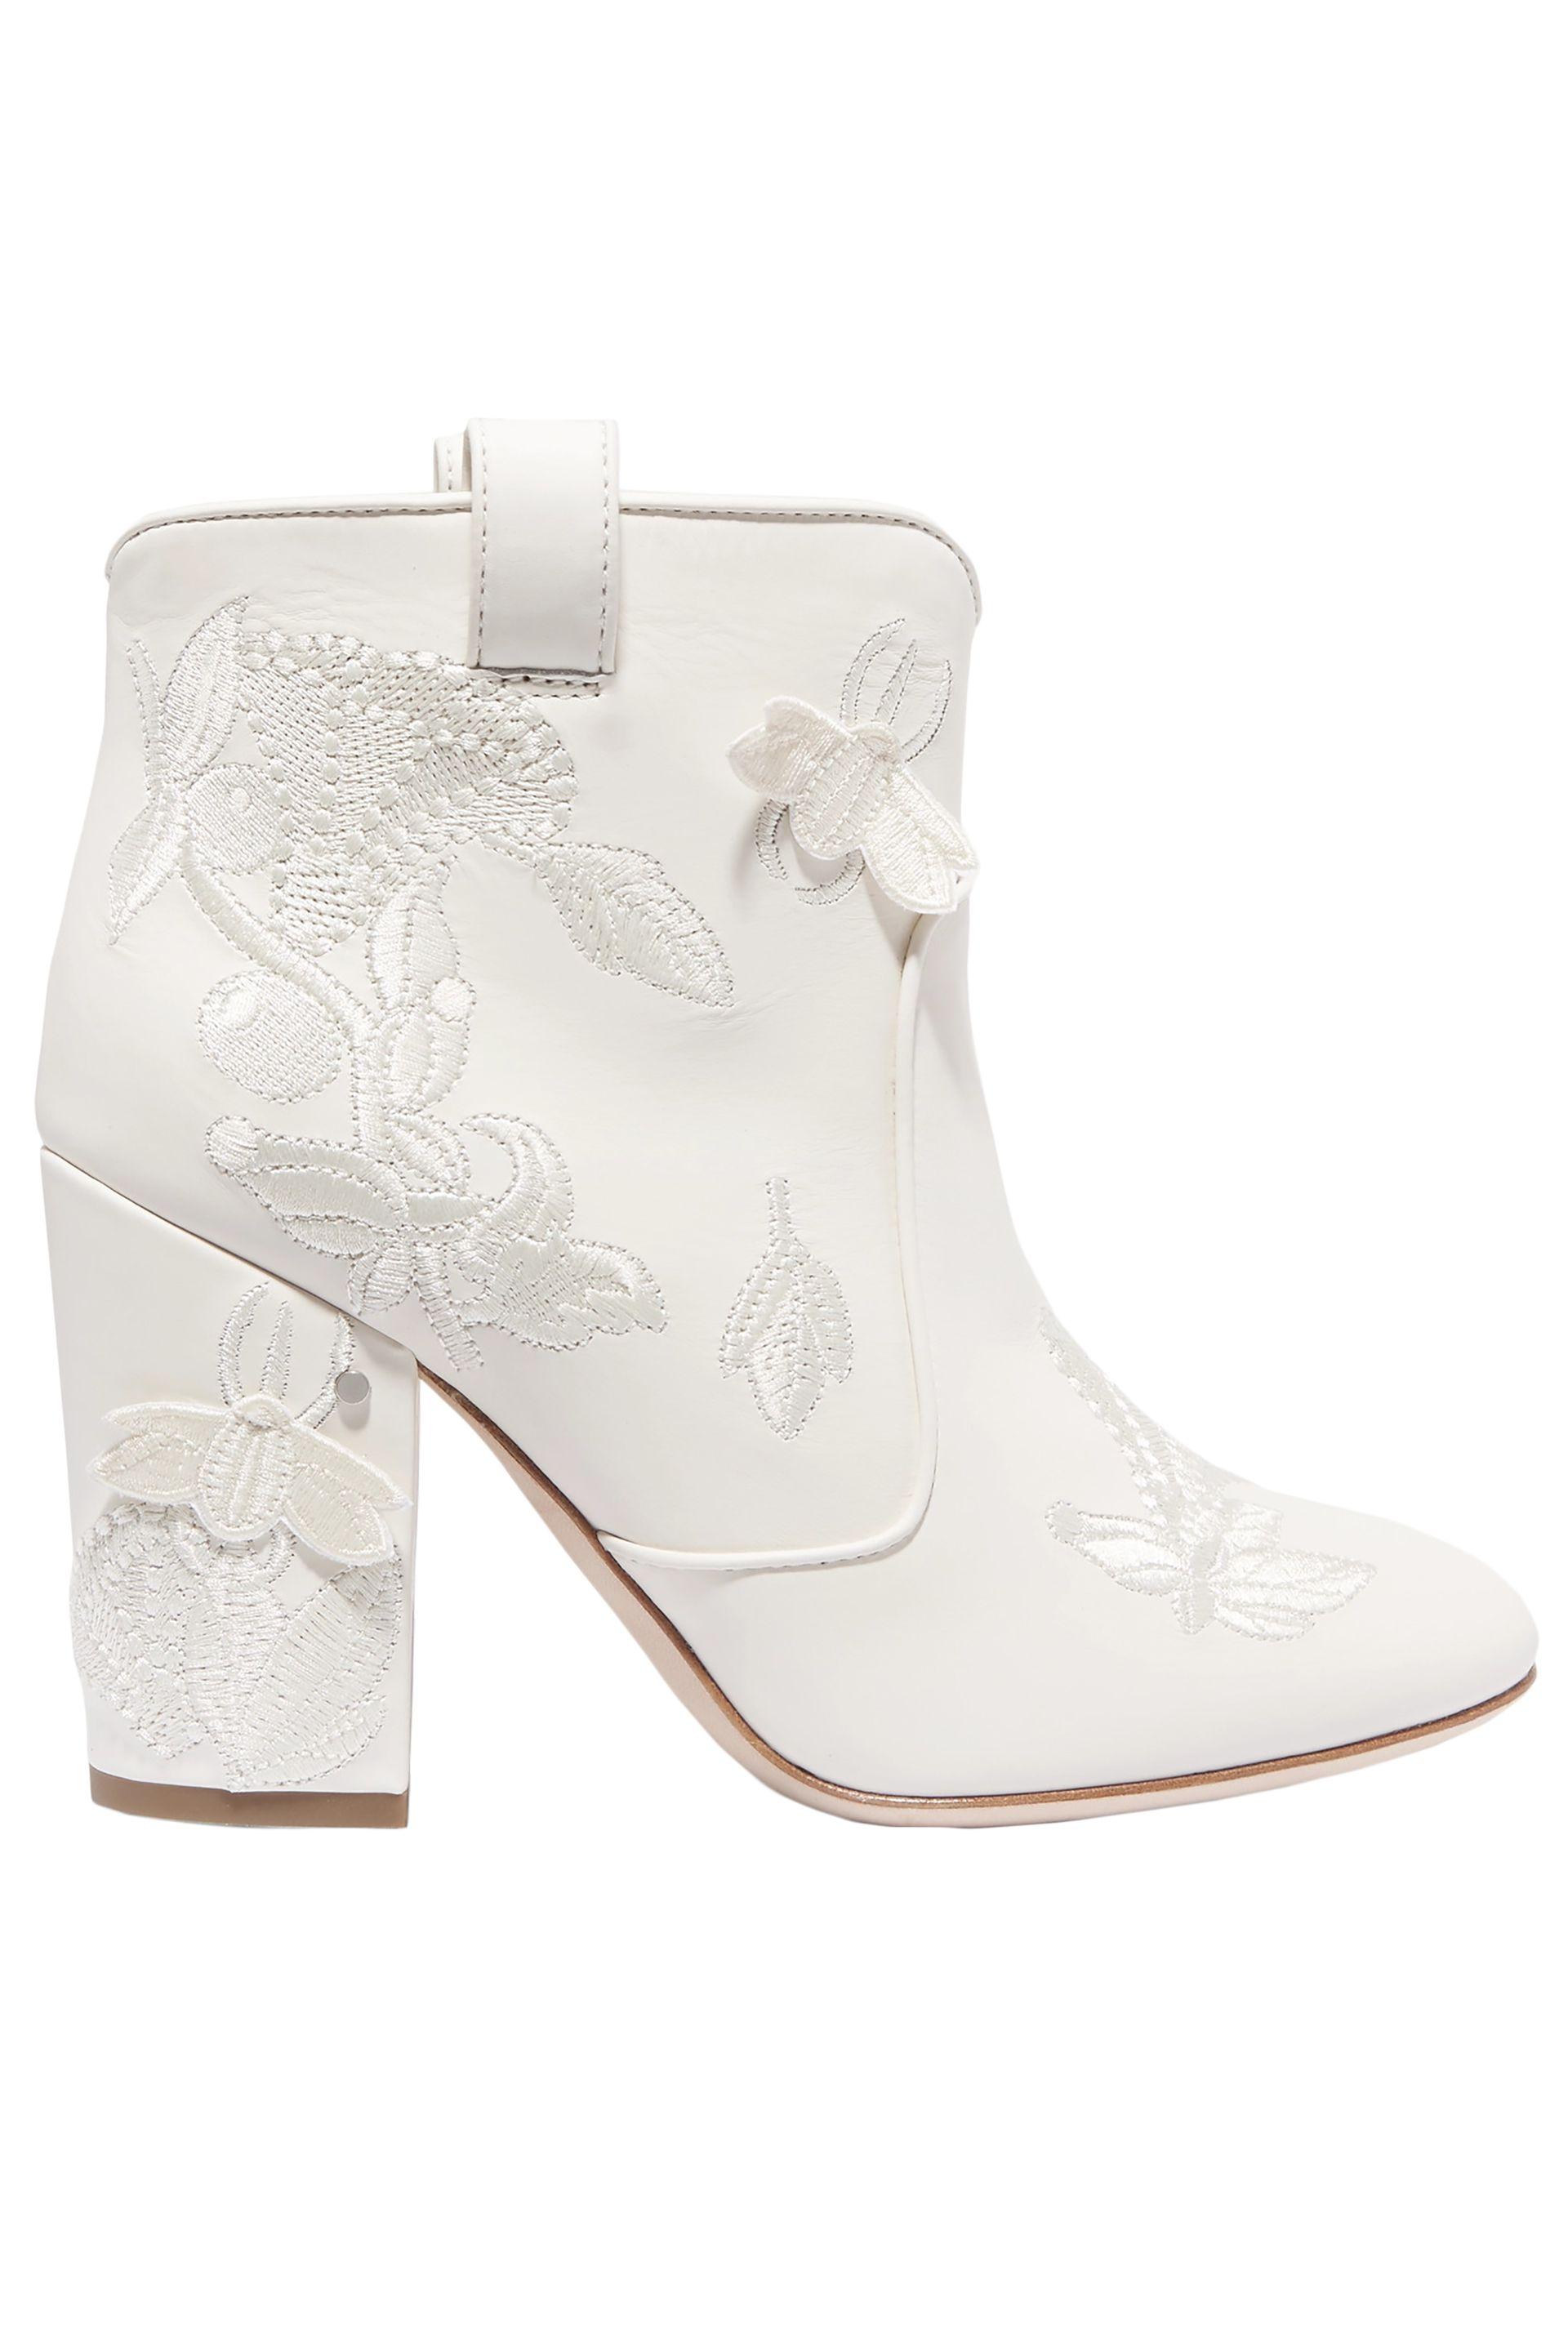 Laurence Dacade Woman Pete Embroidered Leather Ankle Boots Ivory in White |  Lyst